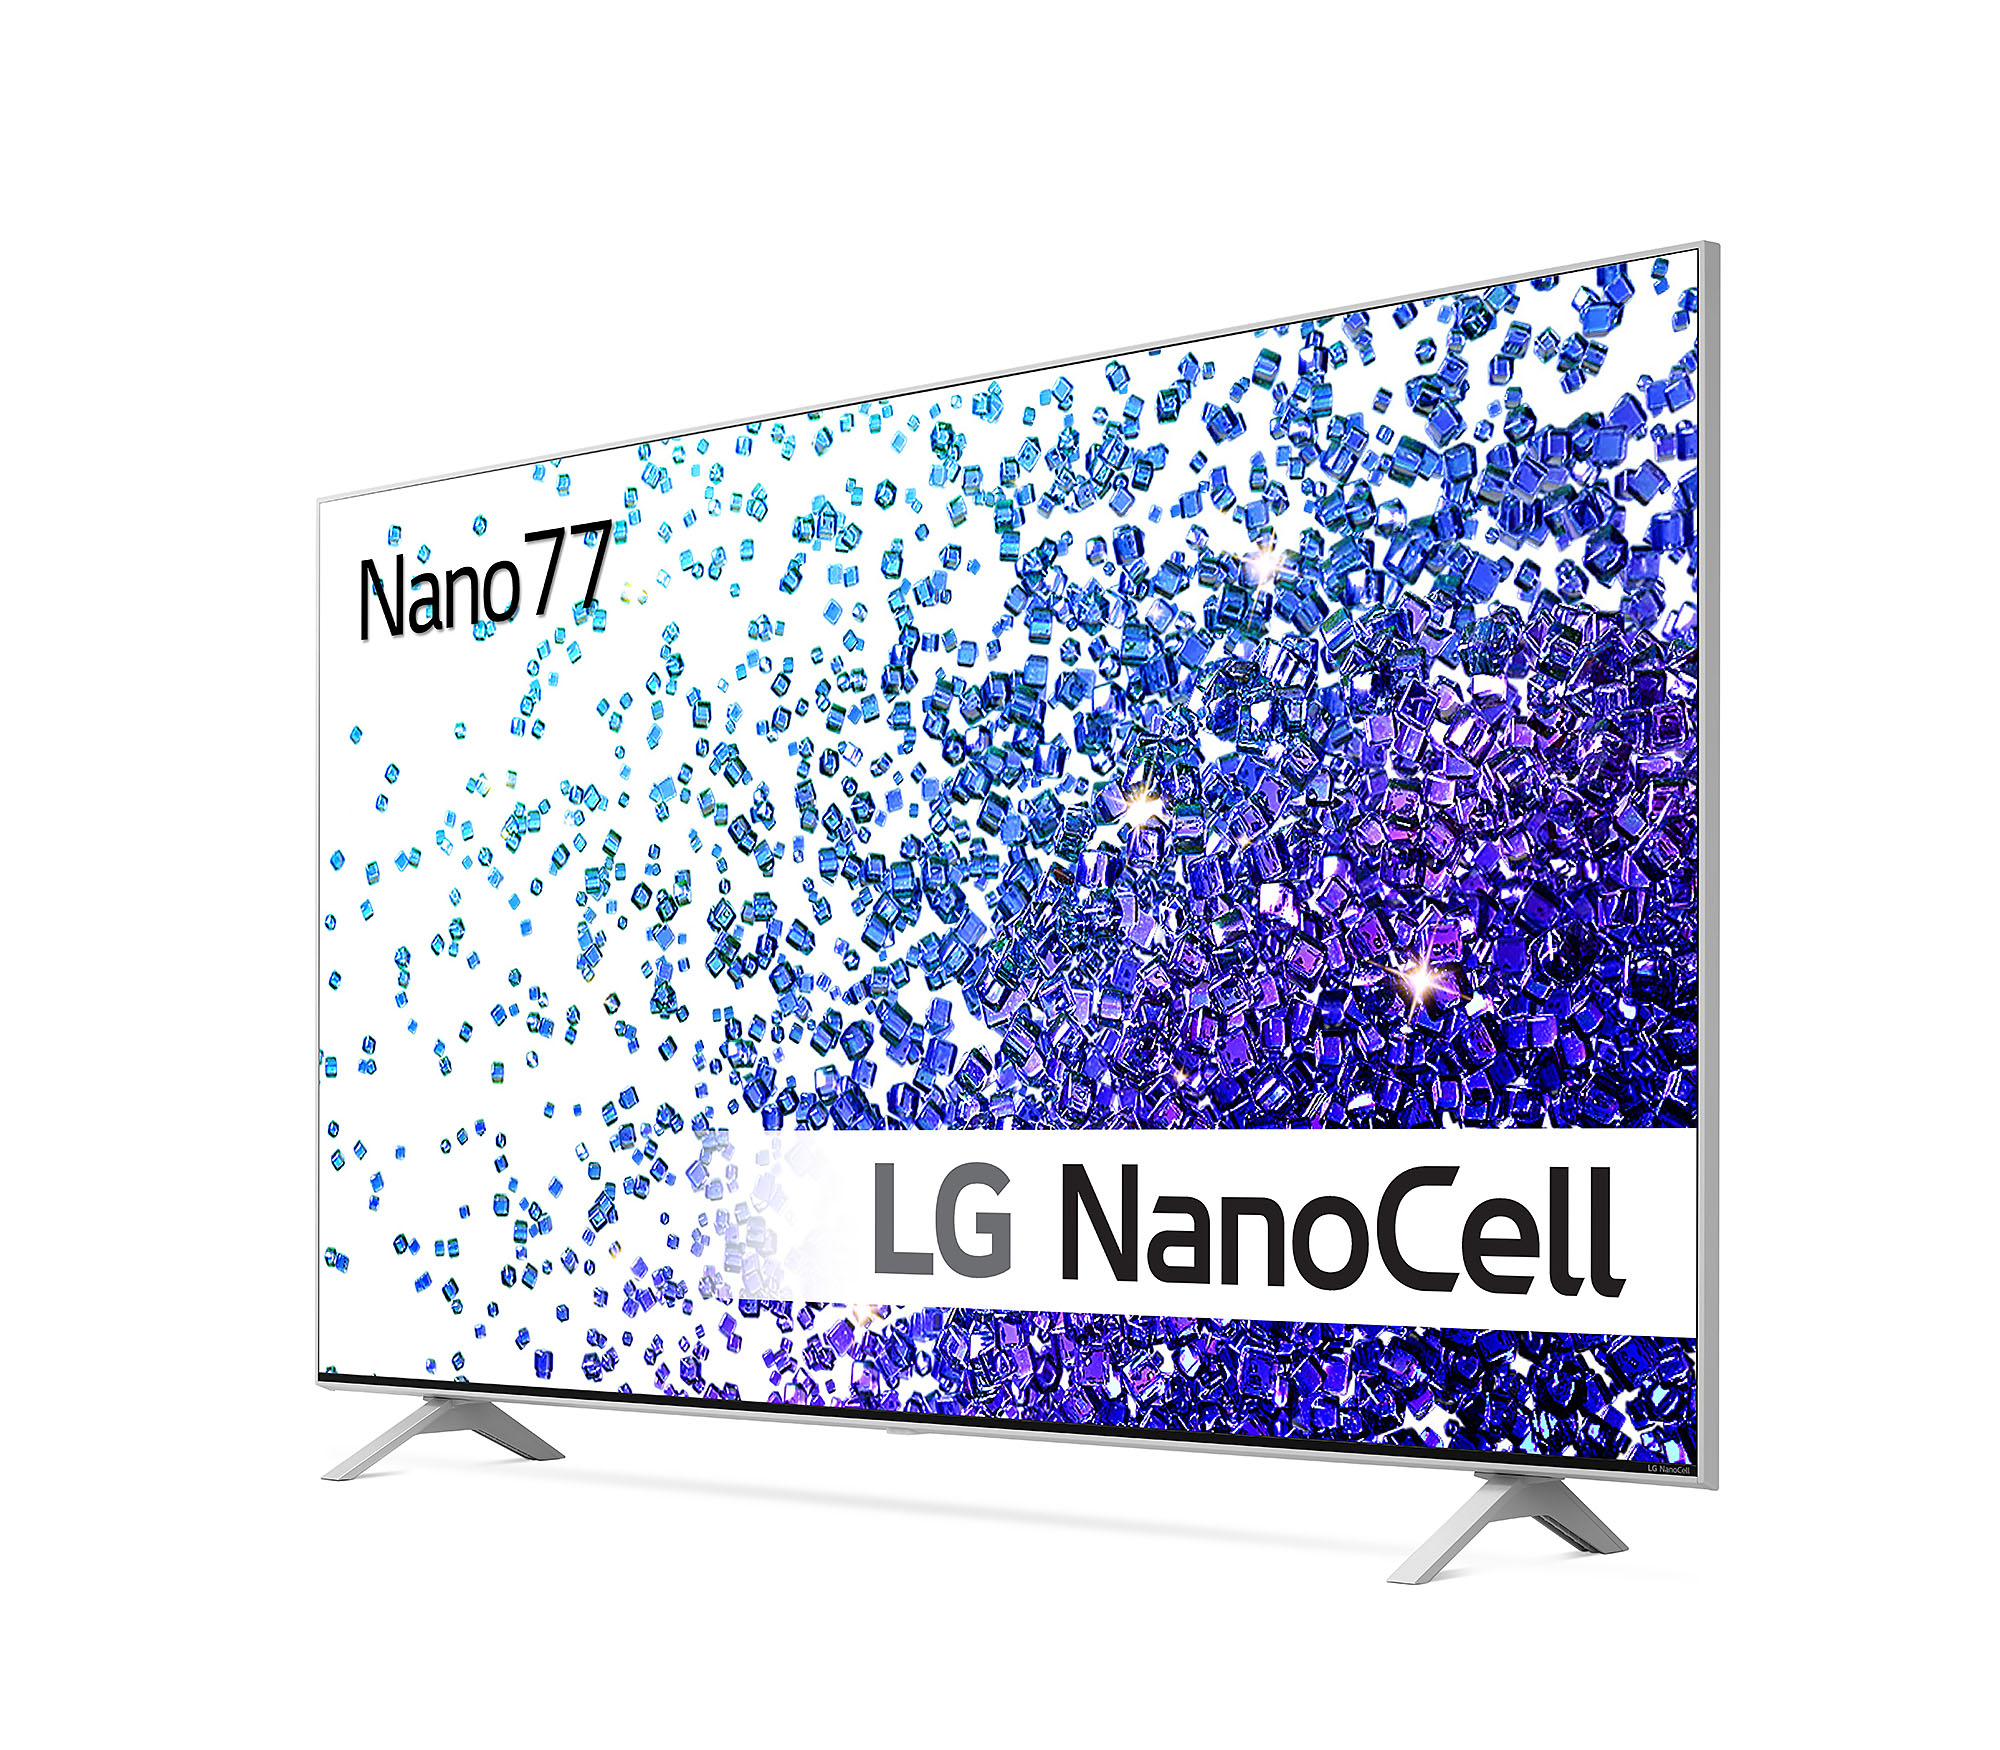 Lg nanocell 43. LG 43nano776pa. LG 43nanocell776pa. LG 43nano776pa 2021 NANOCELL, HDR.